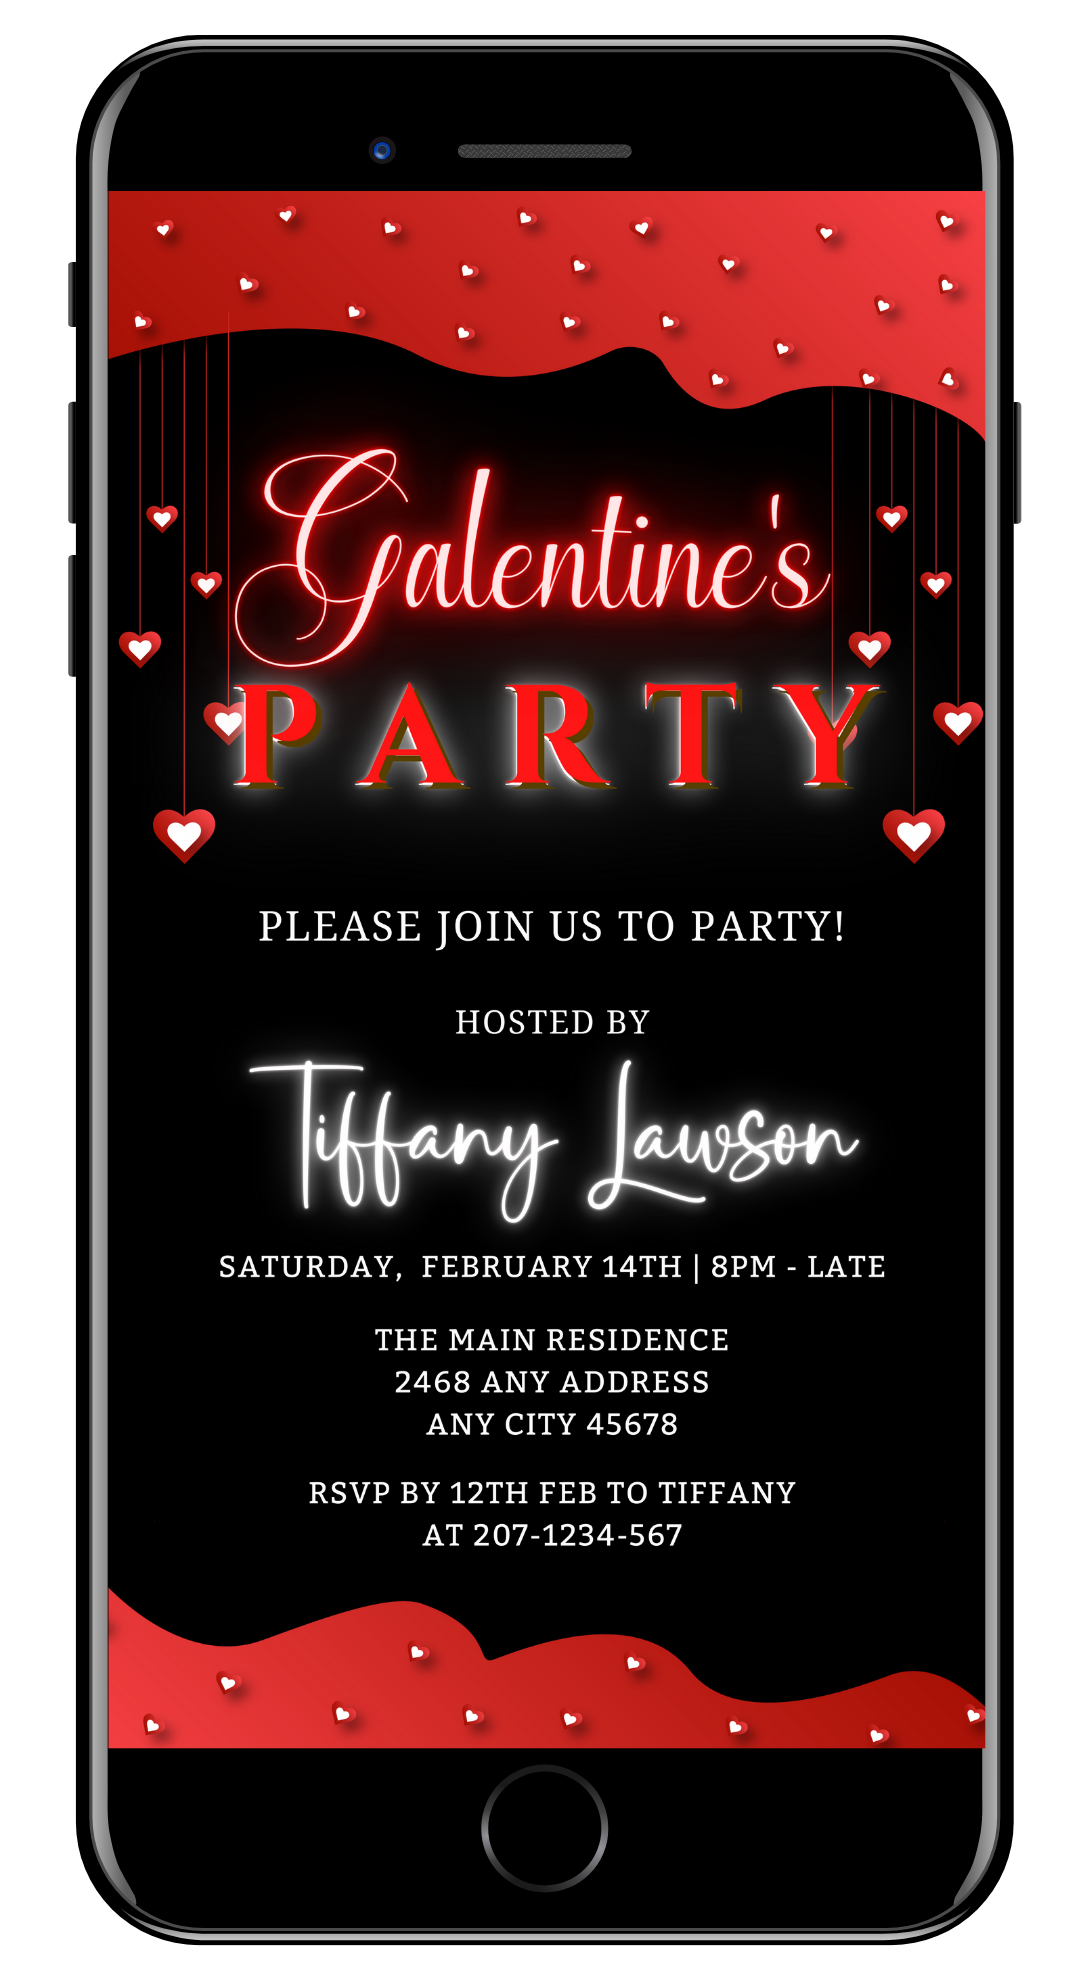 Editable Diamond Red Hearts Border Galentines Party Evite with black and white text, red lights, hearts, customizable via Canva for smartphones.